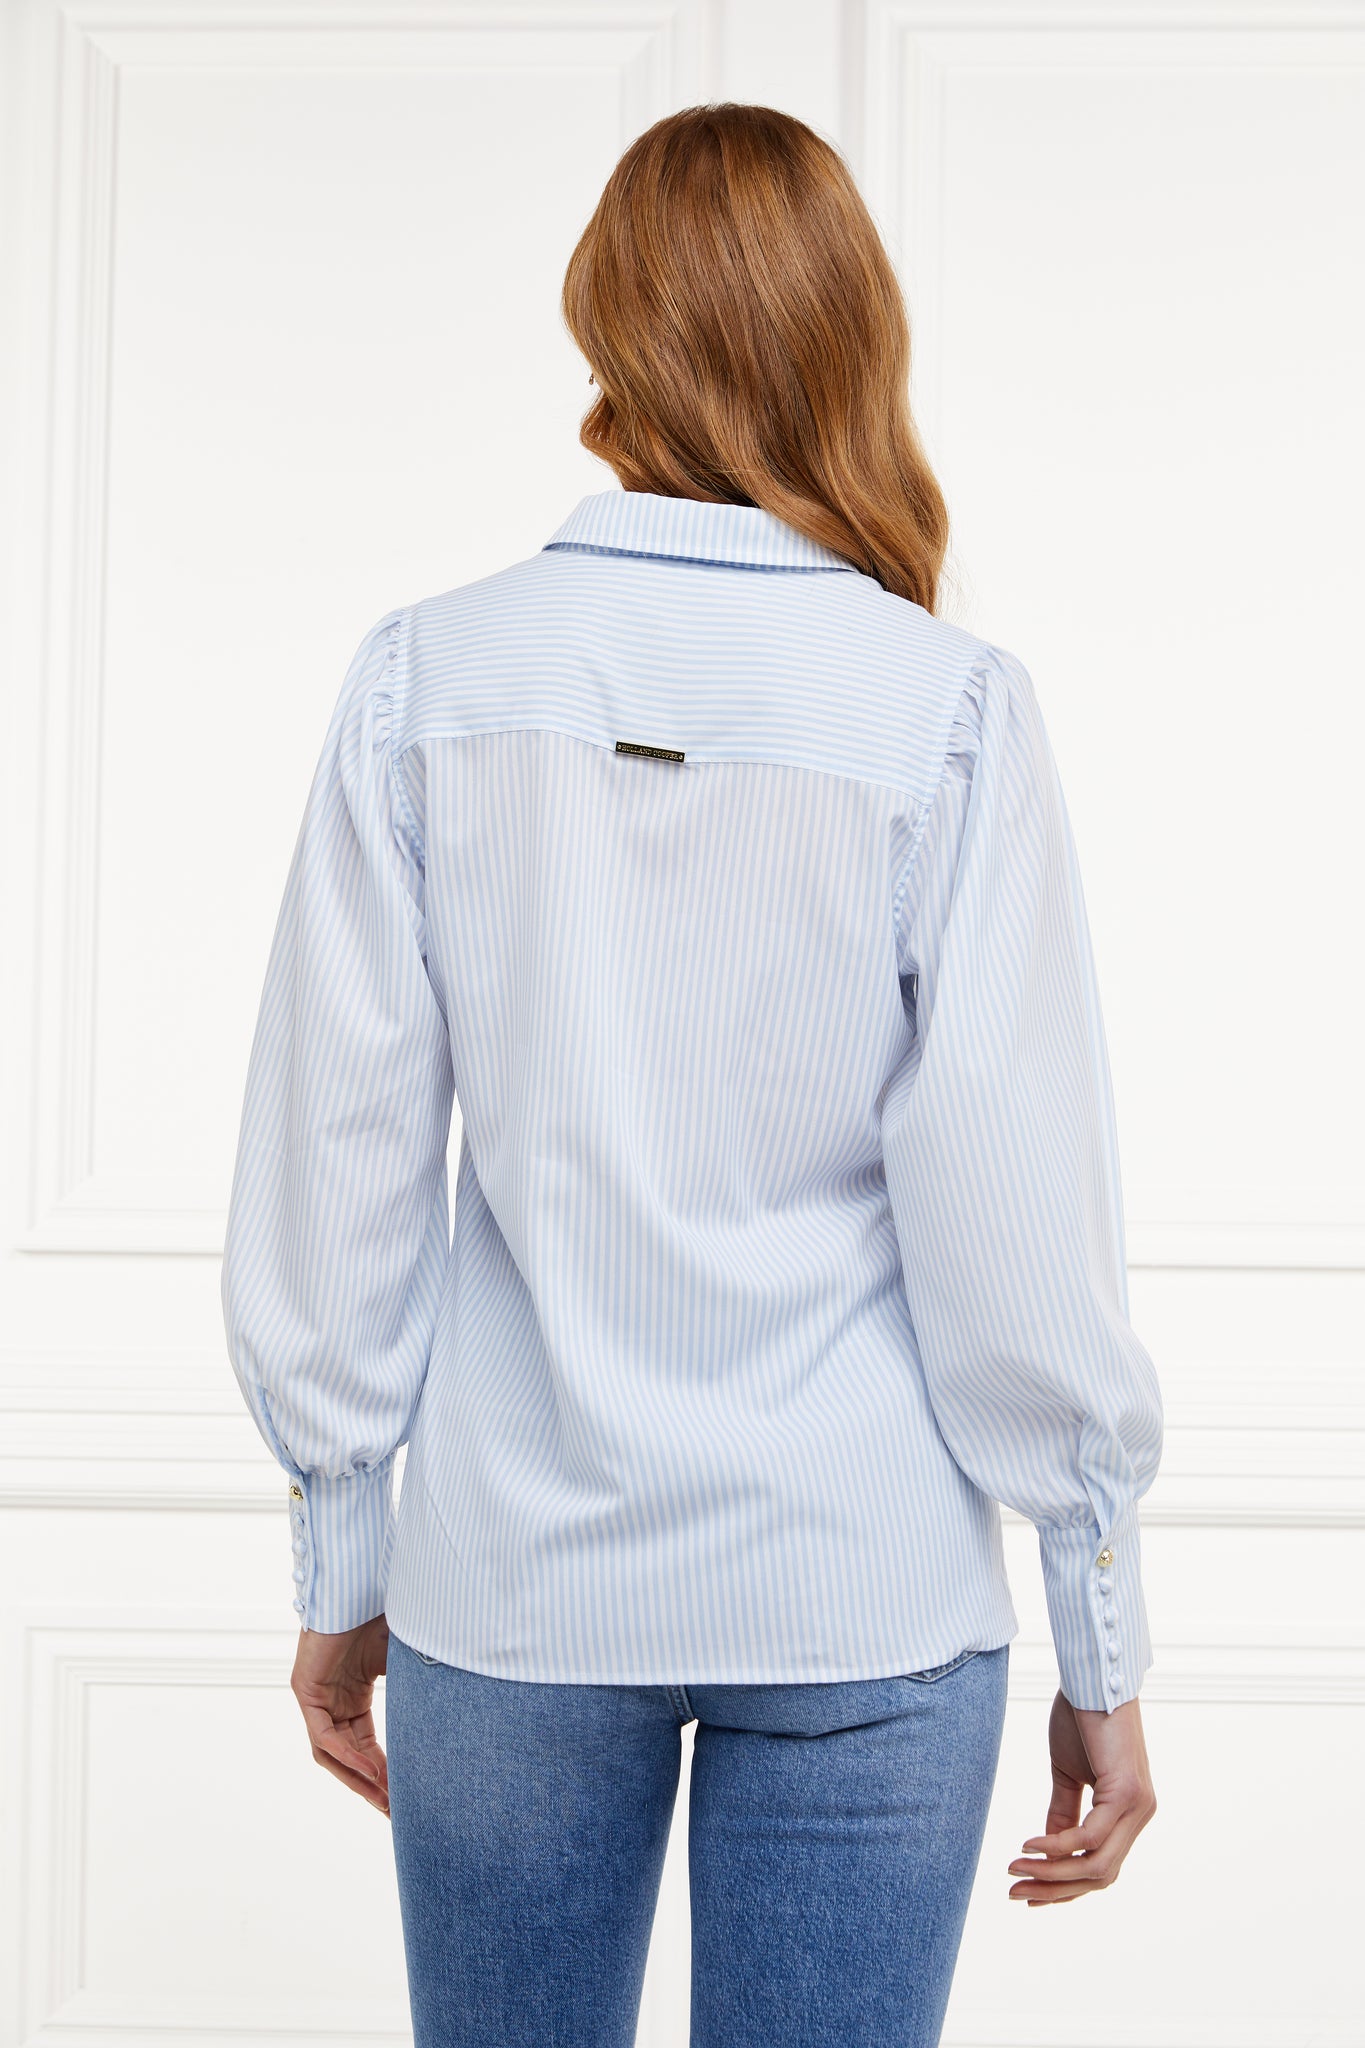 back image of classic fitting shirt with long sleeves and subtle puffy shoulders with thin blue and white stipe print design with extra long cuffs and rounded collar detailed with fabric buttons 